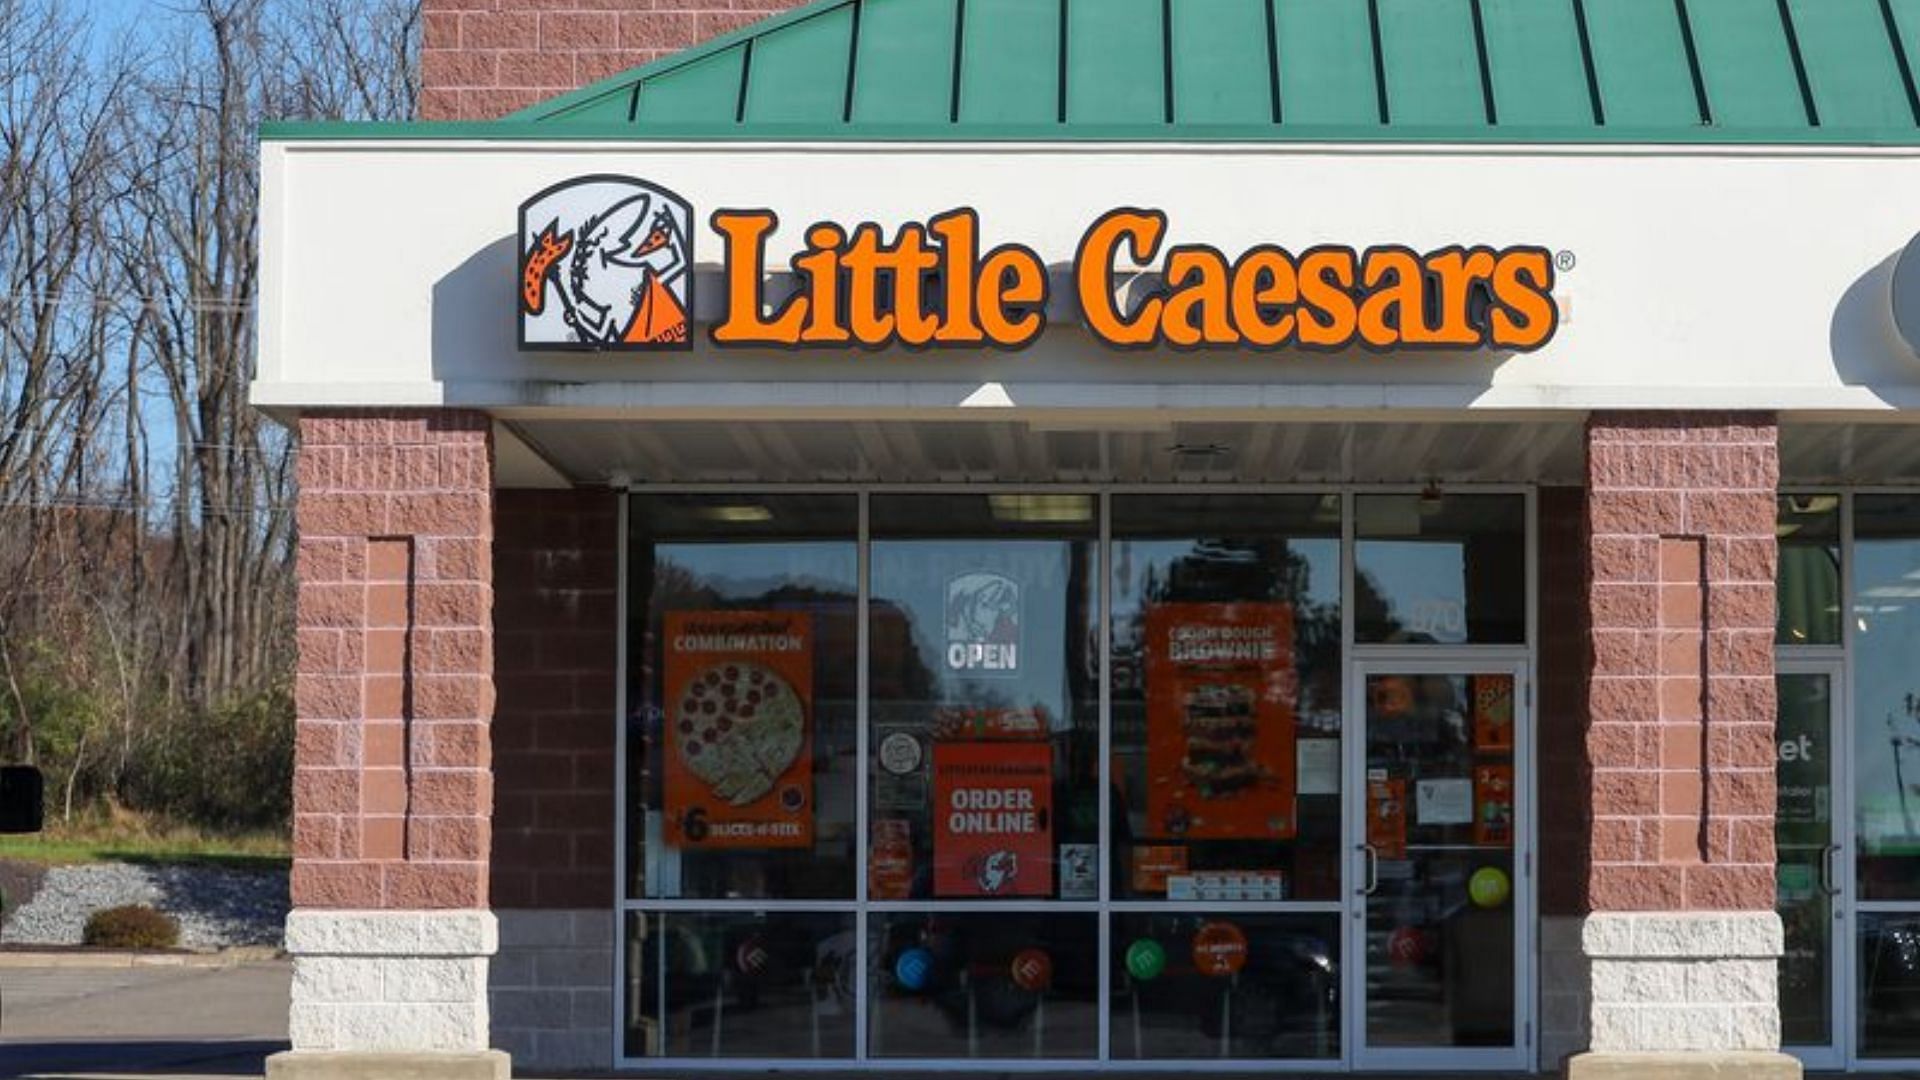 exterior of a Little Caesars&rsquo; restaurant in Bloomsburg (Photo via Paul Weaver/SOPA Images/LightRocket/GettyImages)